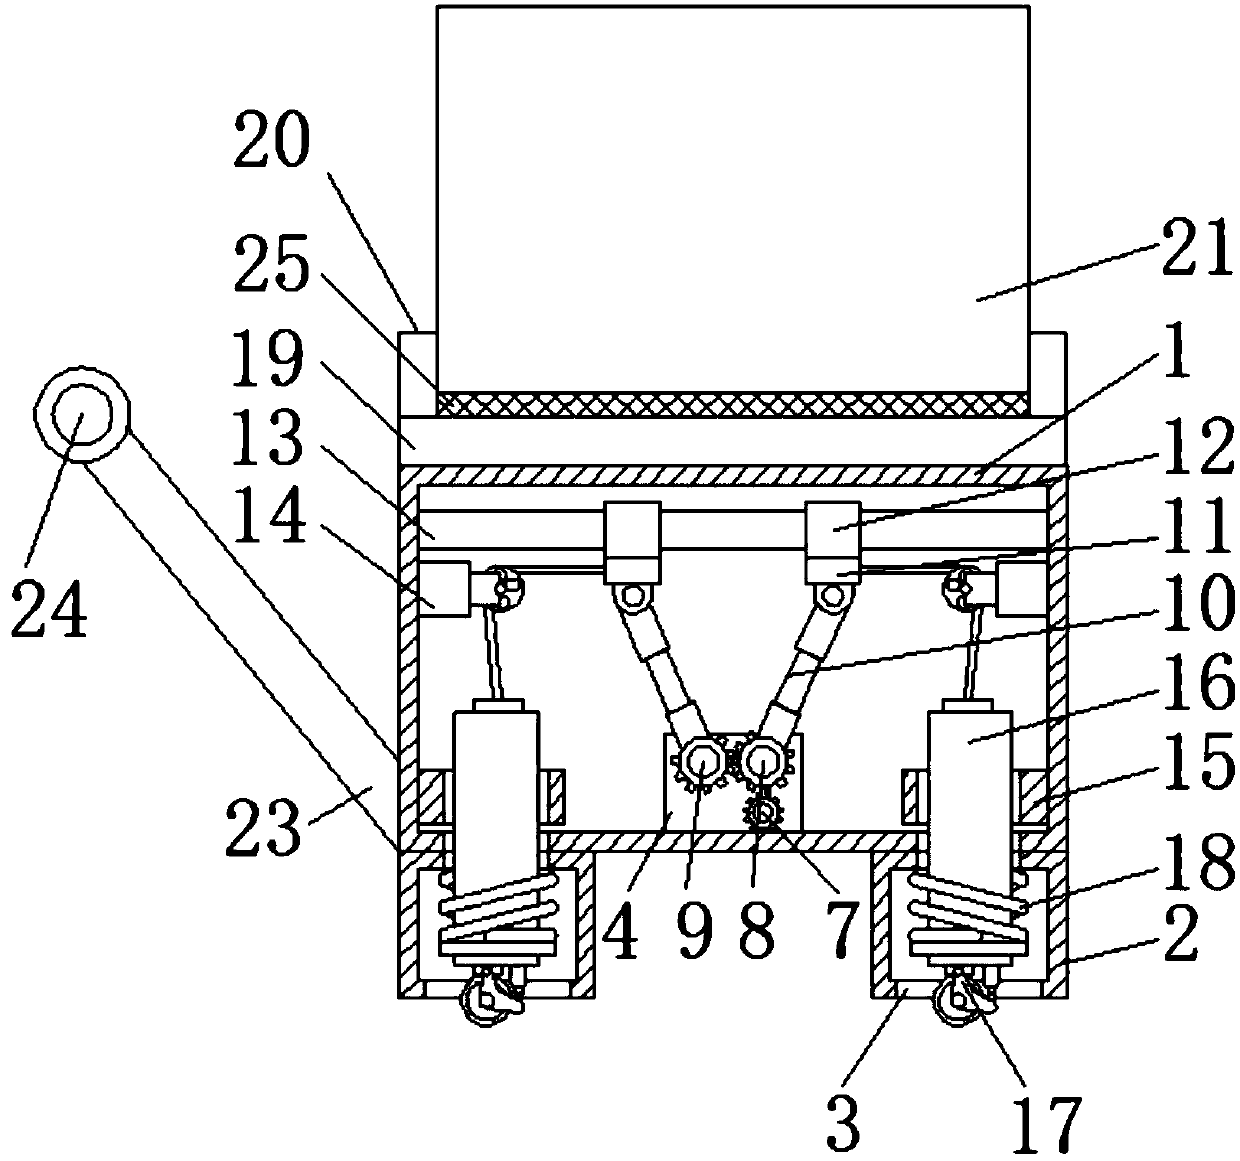 Water treatment device convenient to move